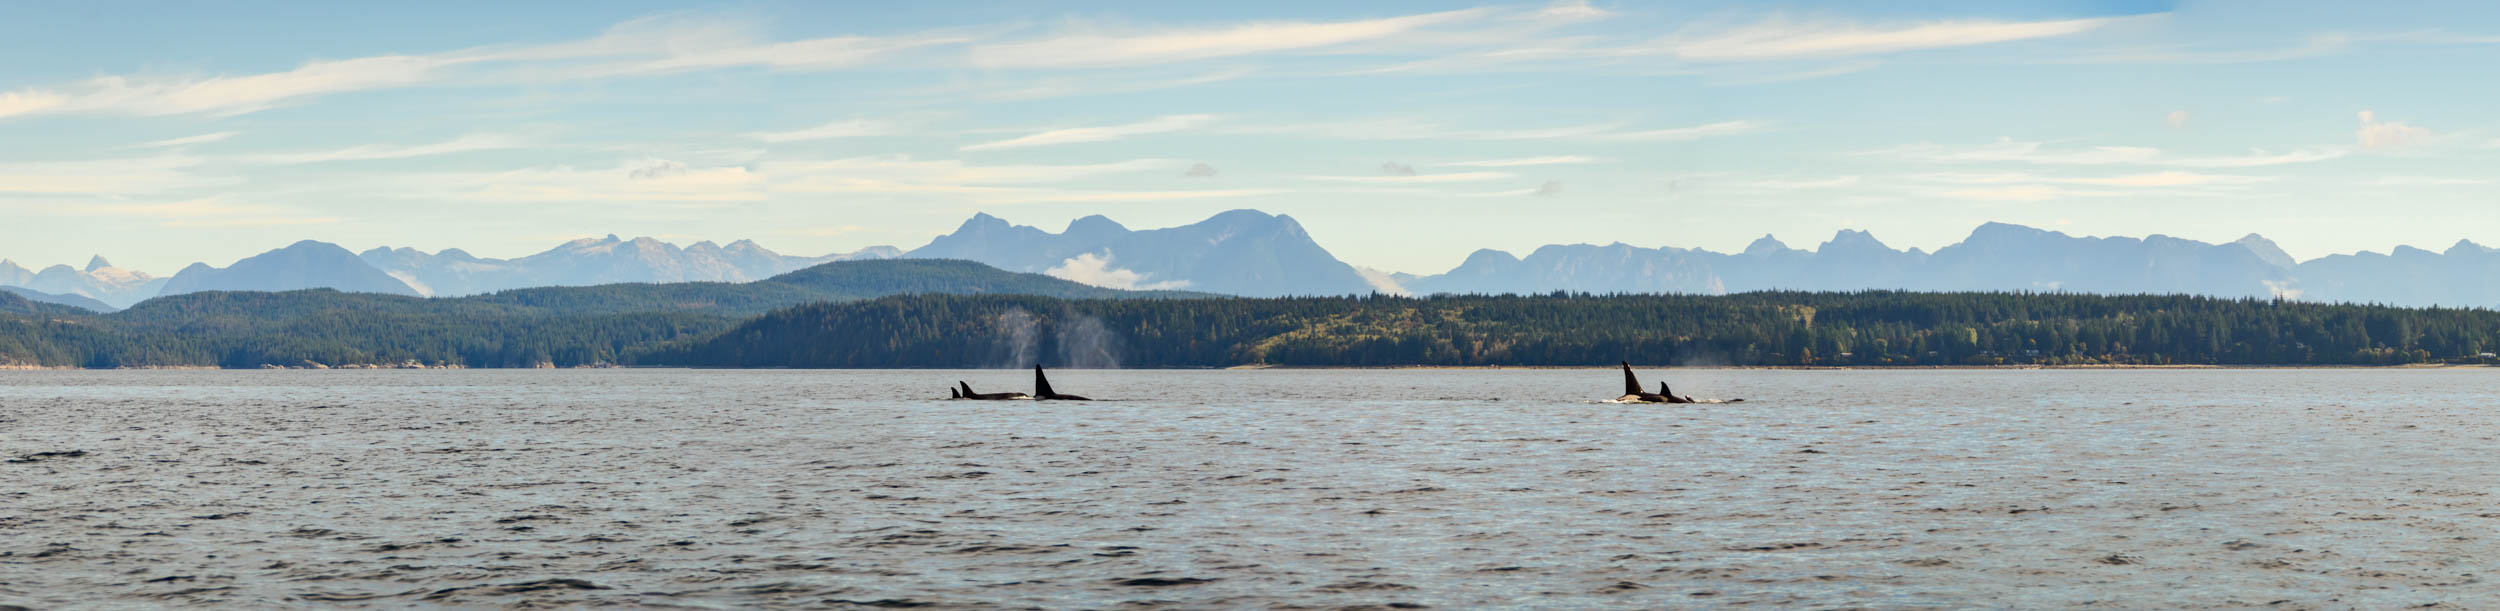 Large format image of killer whale pod in Salish Sea